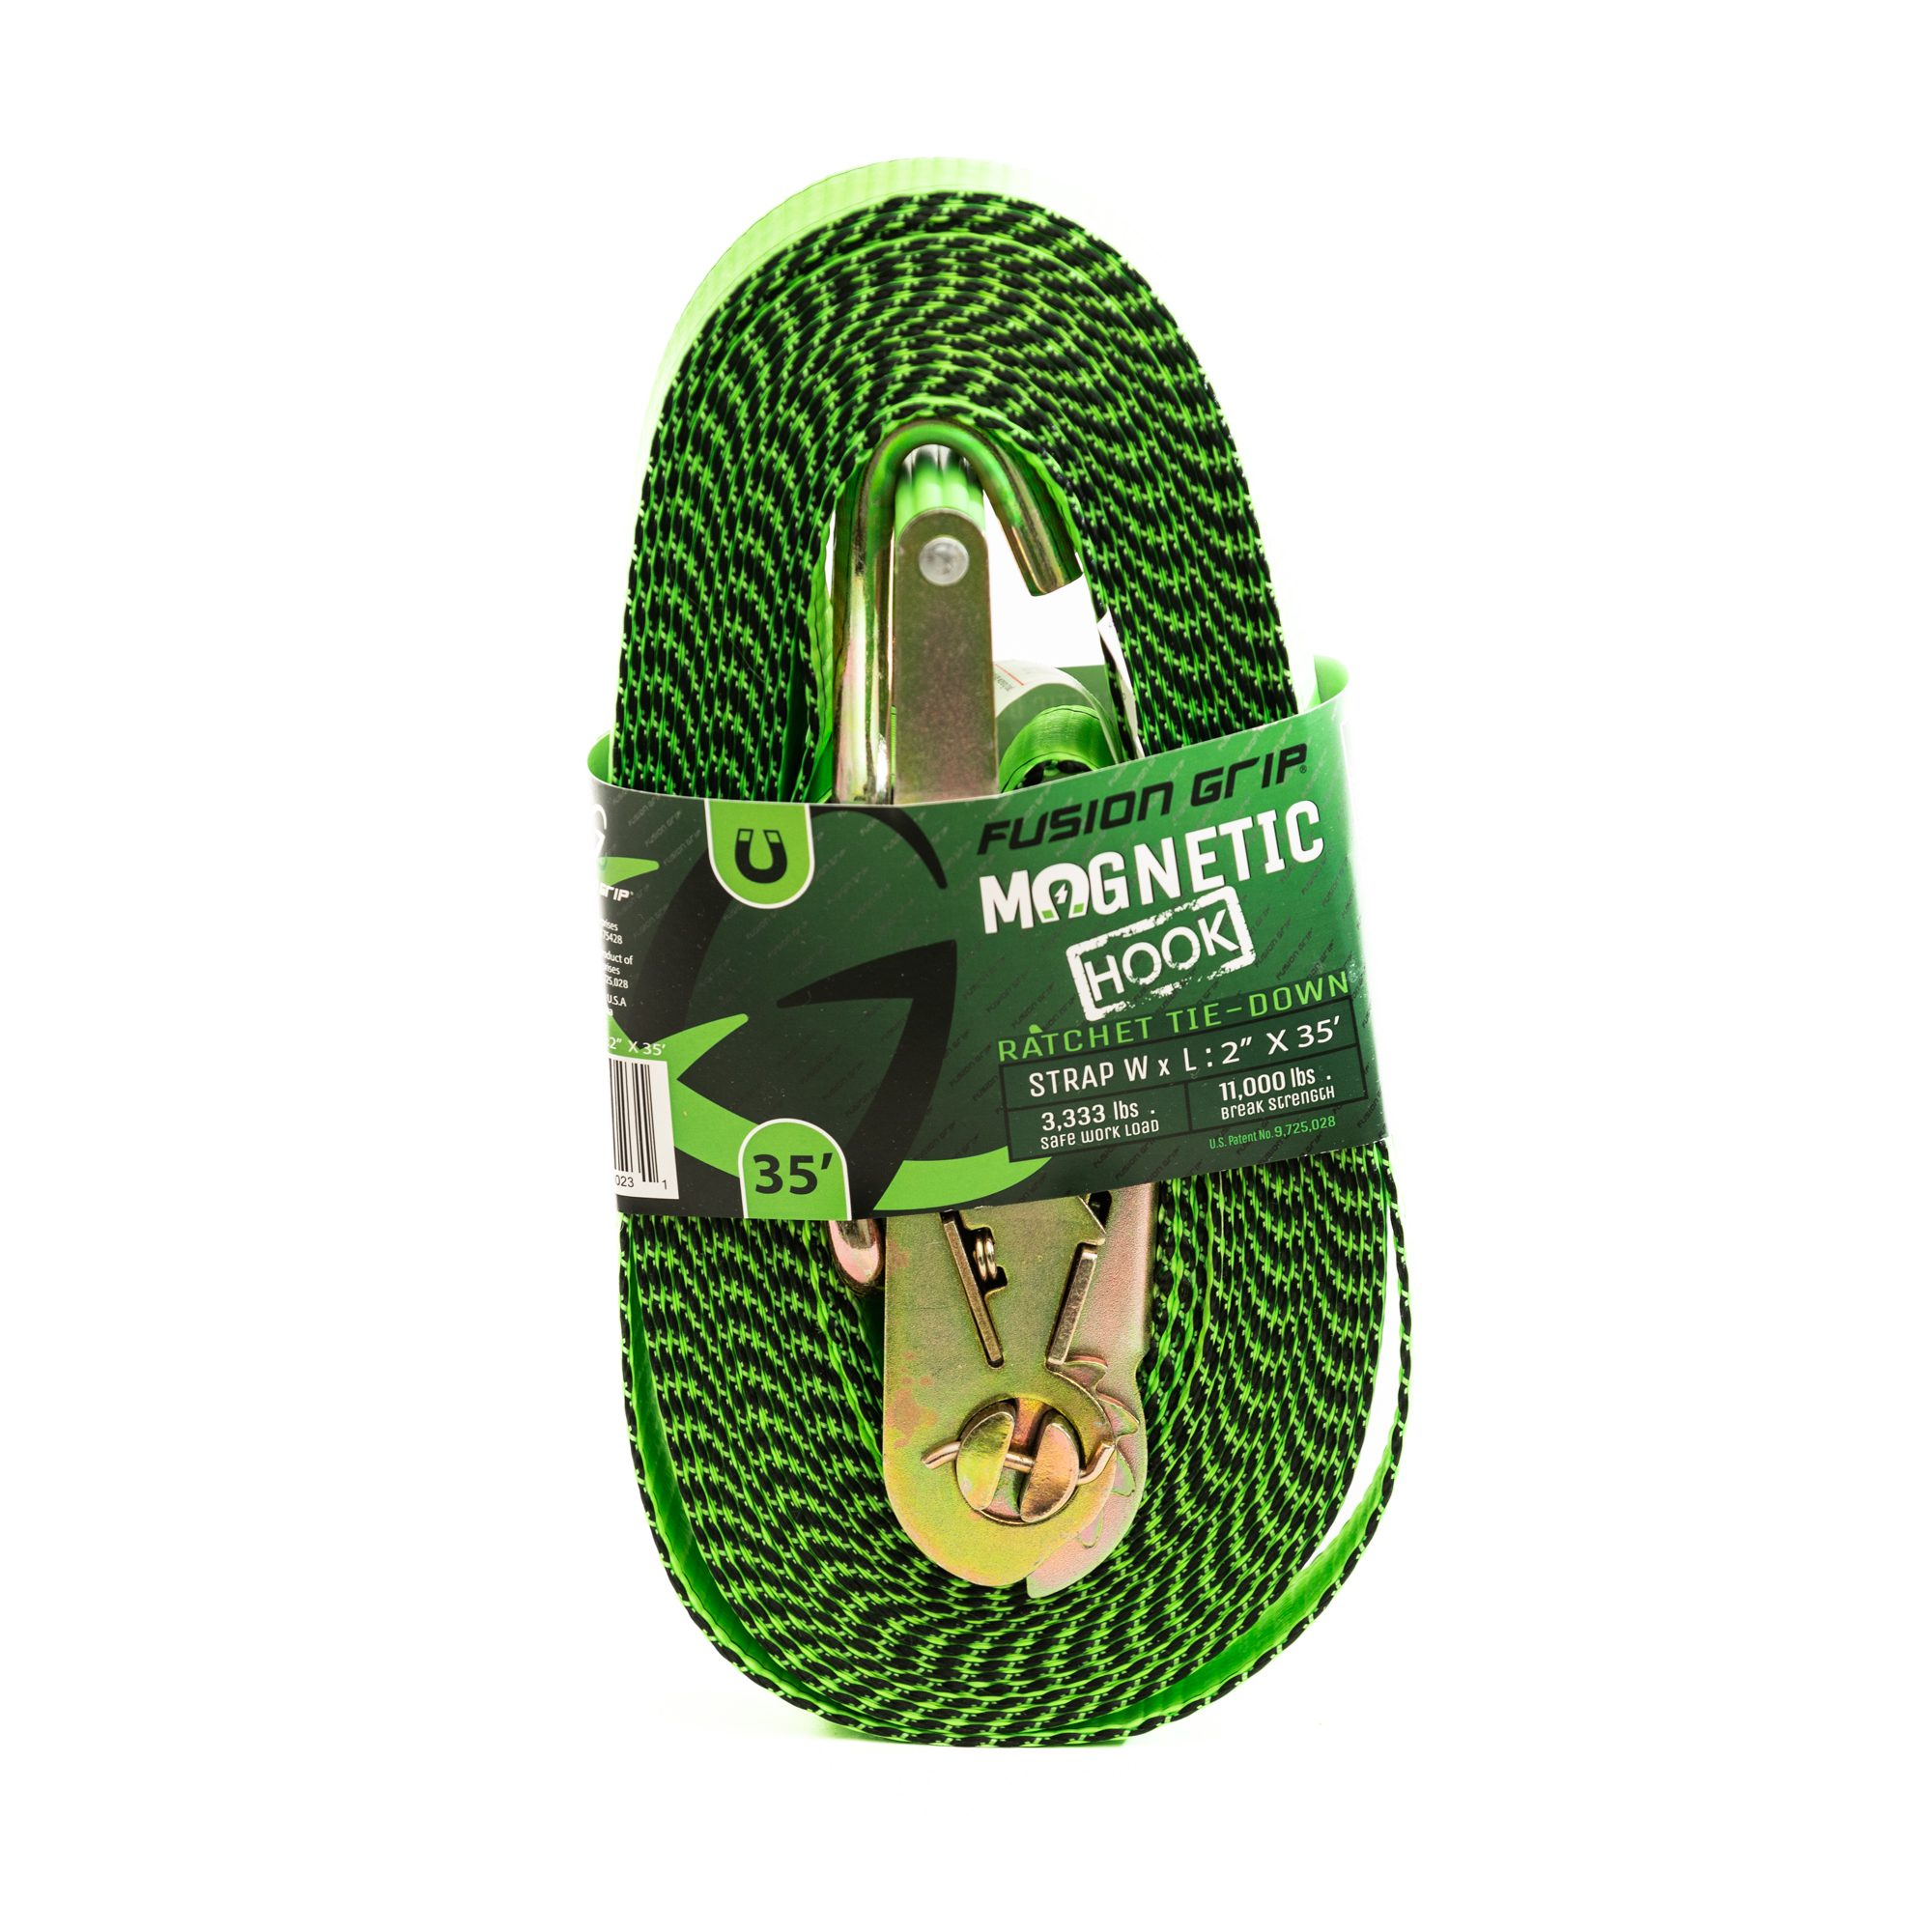 Fusion Grip, 2Inchx35ft. Magnetic Wire Hook Rachet Tie-Down Strap, Working Load 3667 lb, Straps (qty.) 1 Breaking Strength 11000 lb, Model FG235